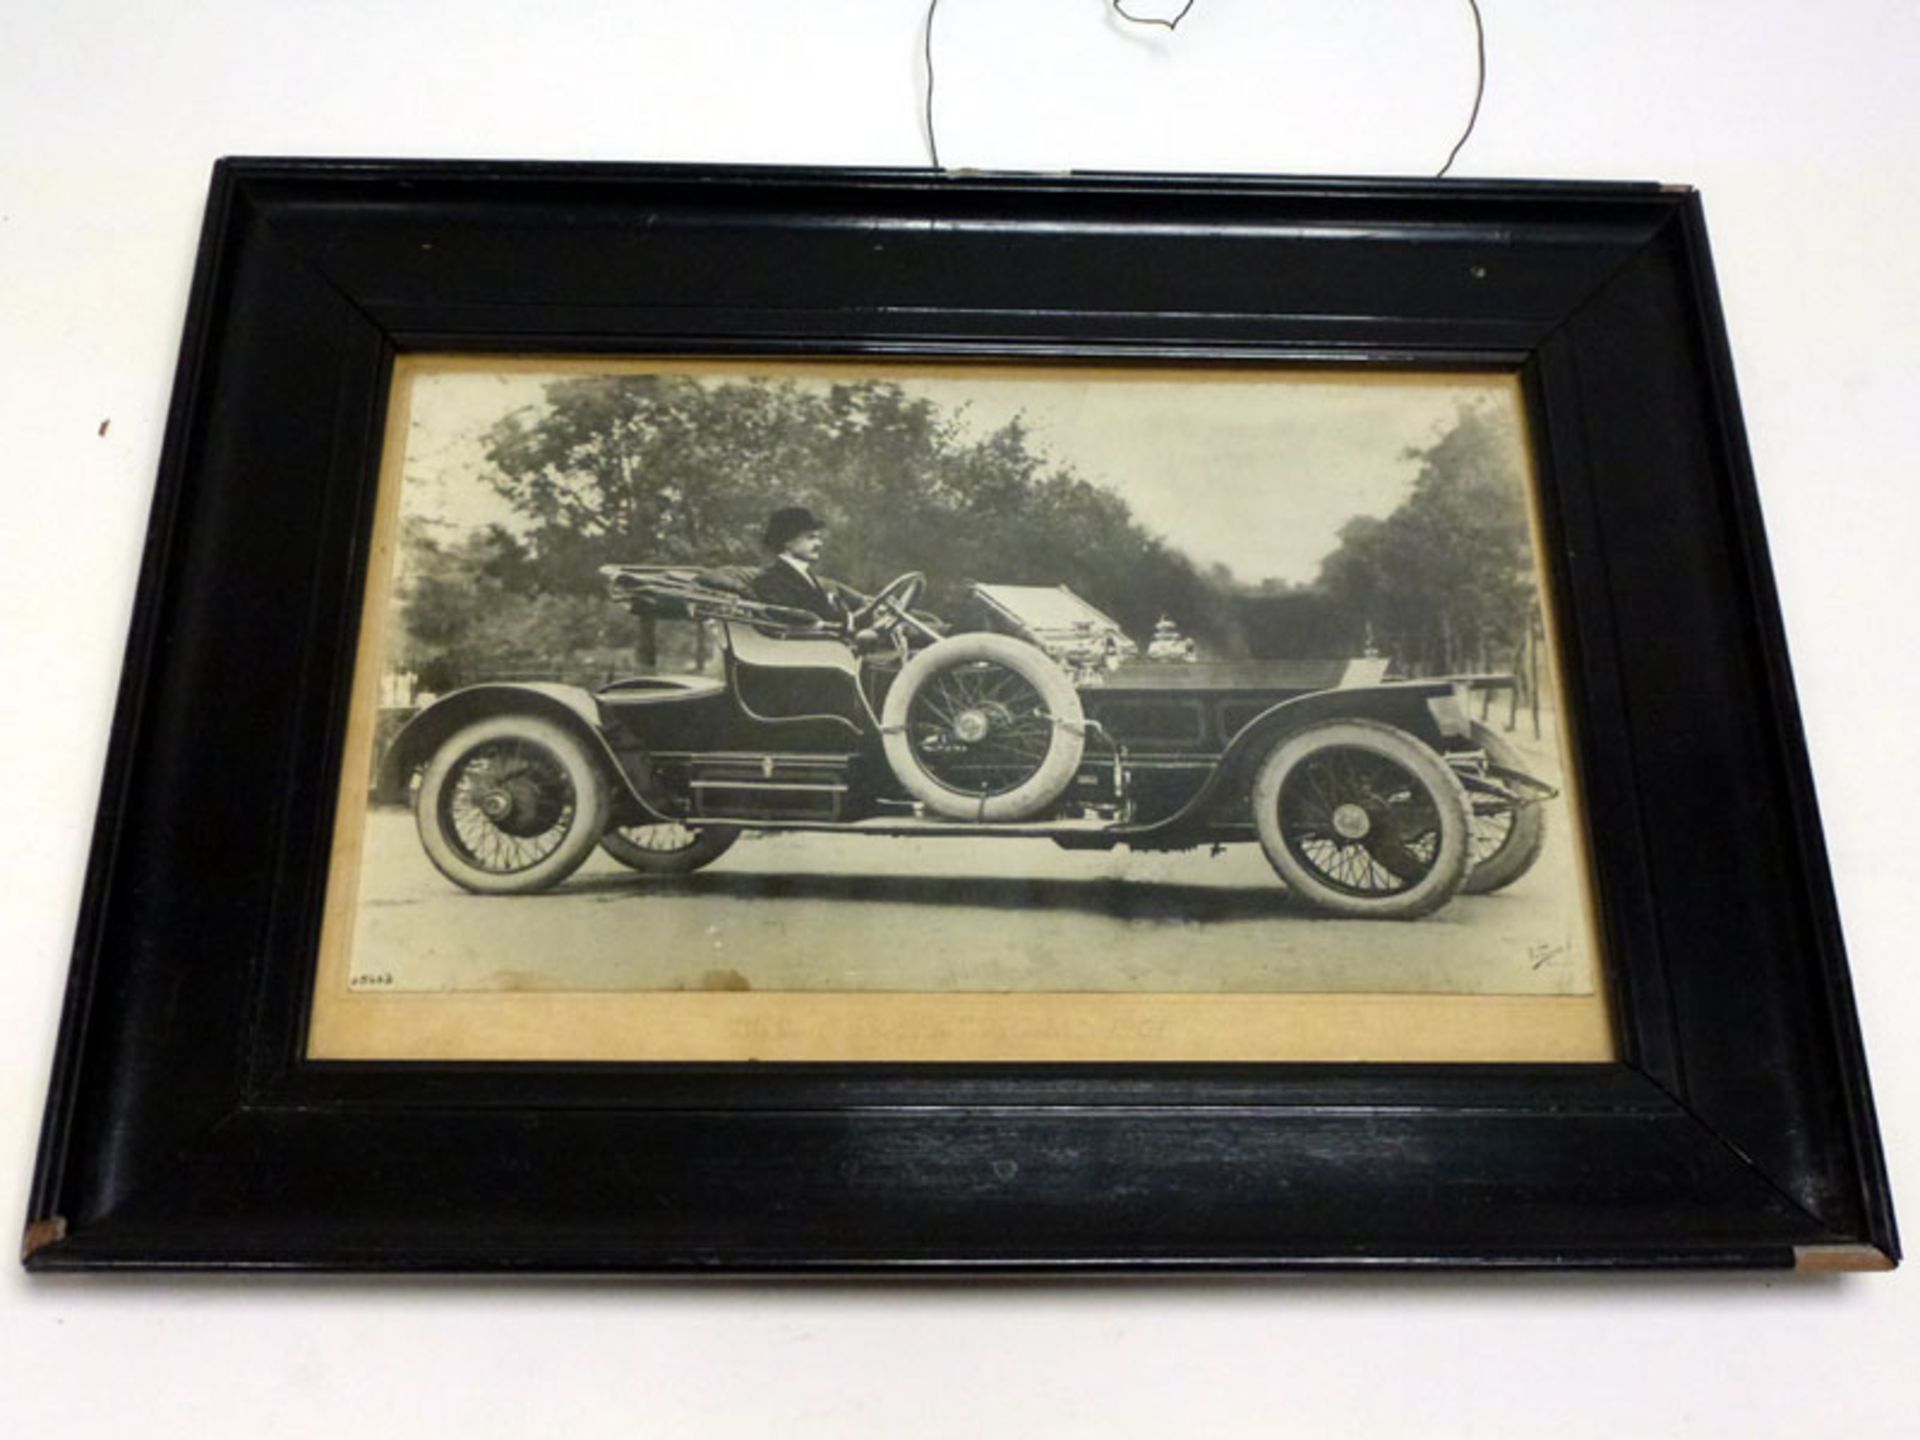 An Extremely Early Rolls-Royce Press Photograph